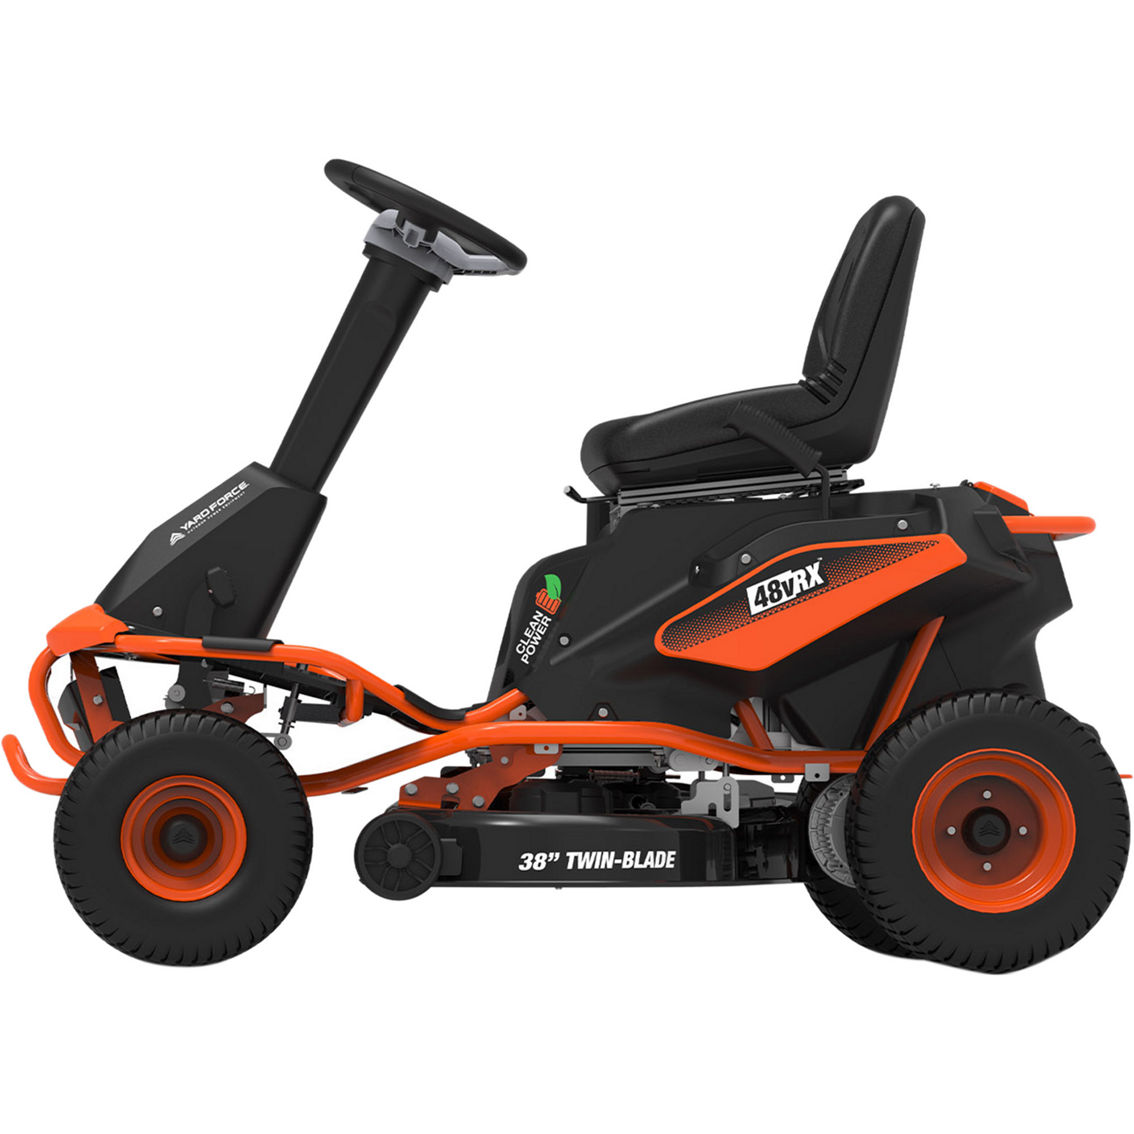 Yard Force 48v Brushless 38 in. Battery-Powered Rear Engine Riding Lawn Mower - Image 4 of 10